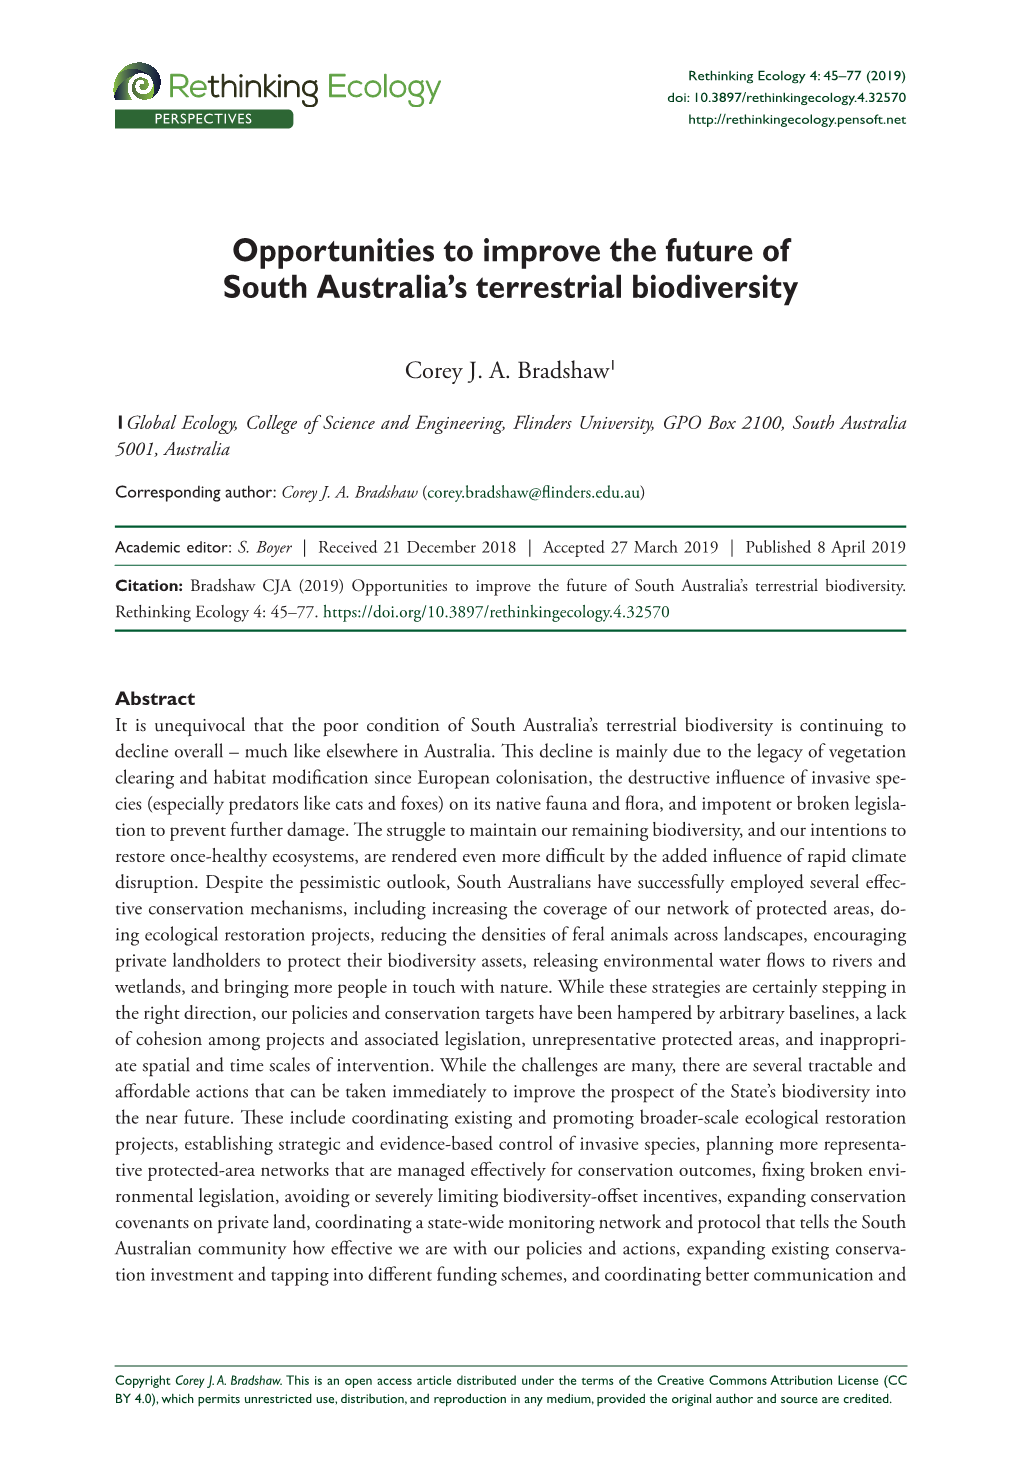 Opportunities to Improve the Future of South Australia's Terrestrial